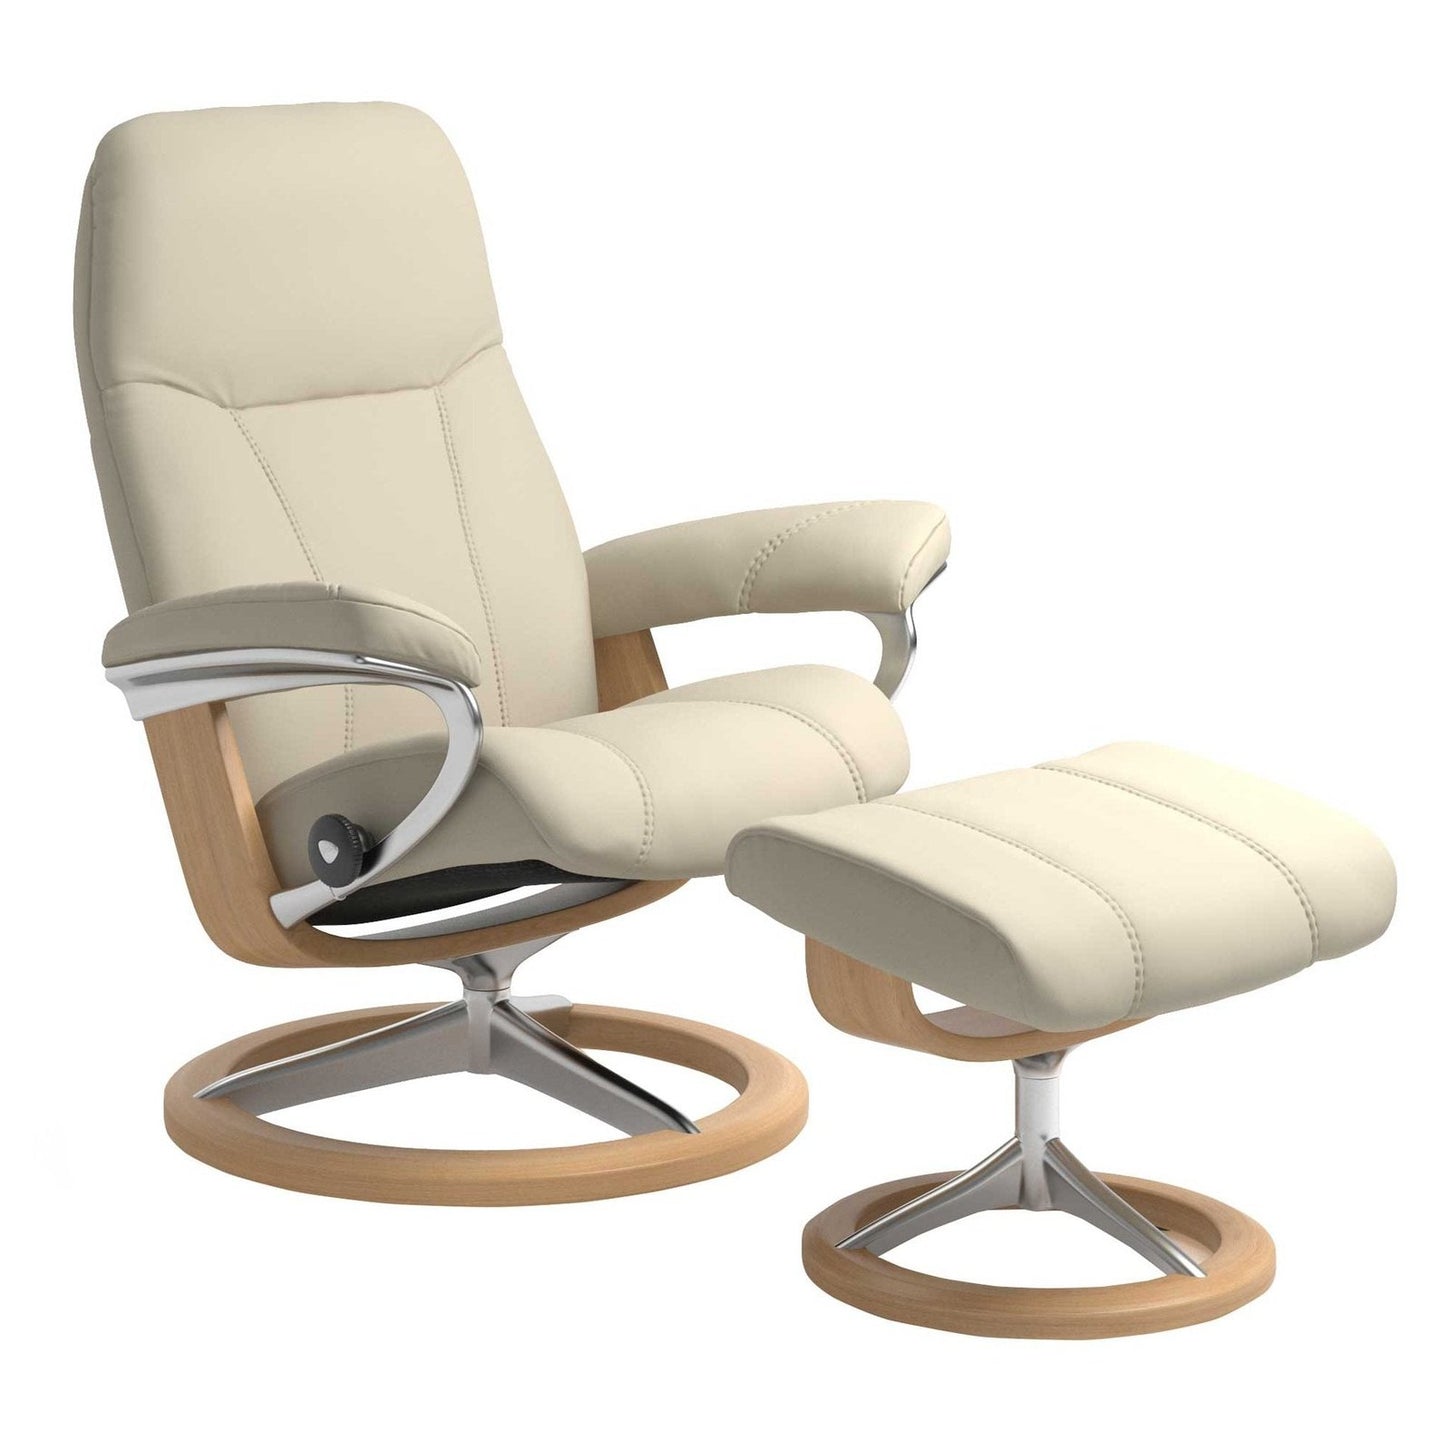 Stressless Consul Medium Signature Base Recliner with Stool SPECIAL OFFER